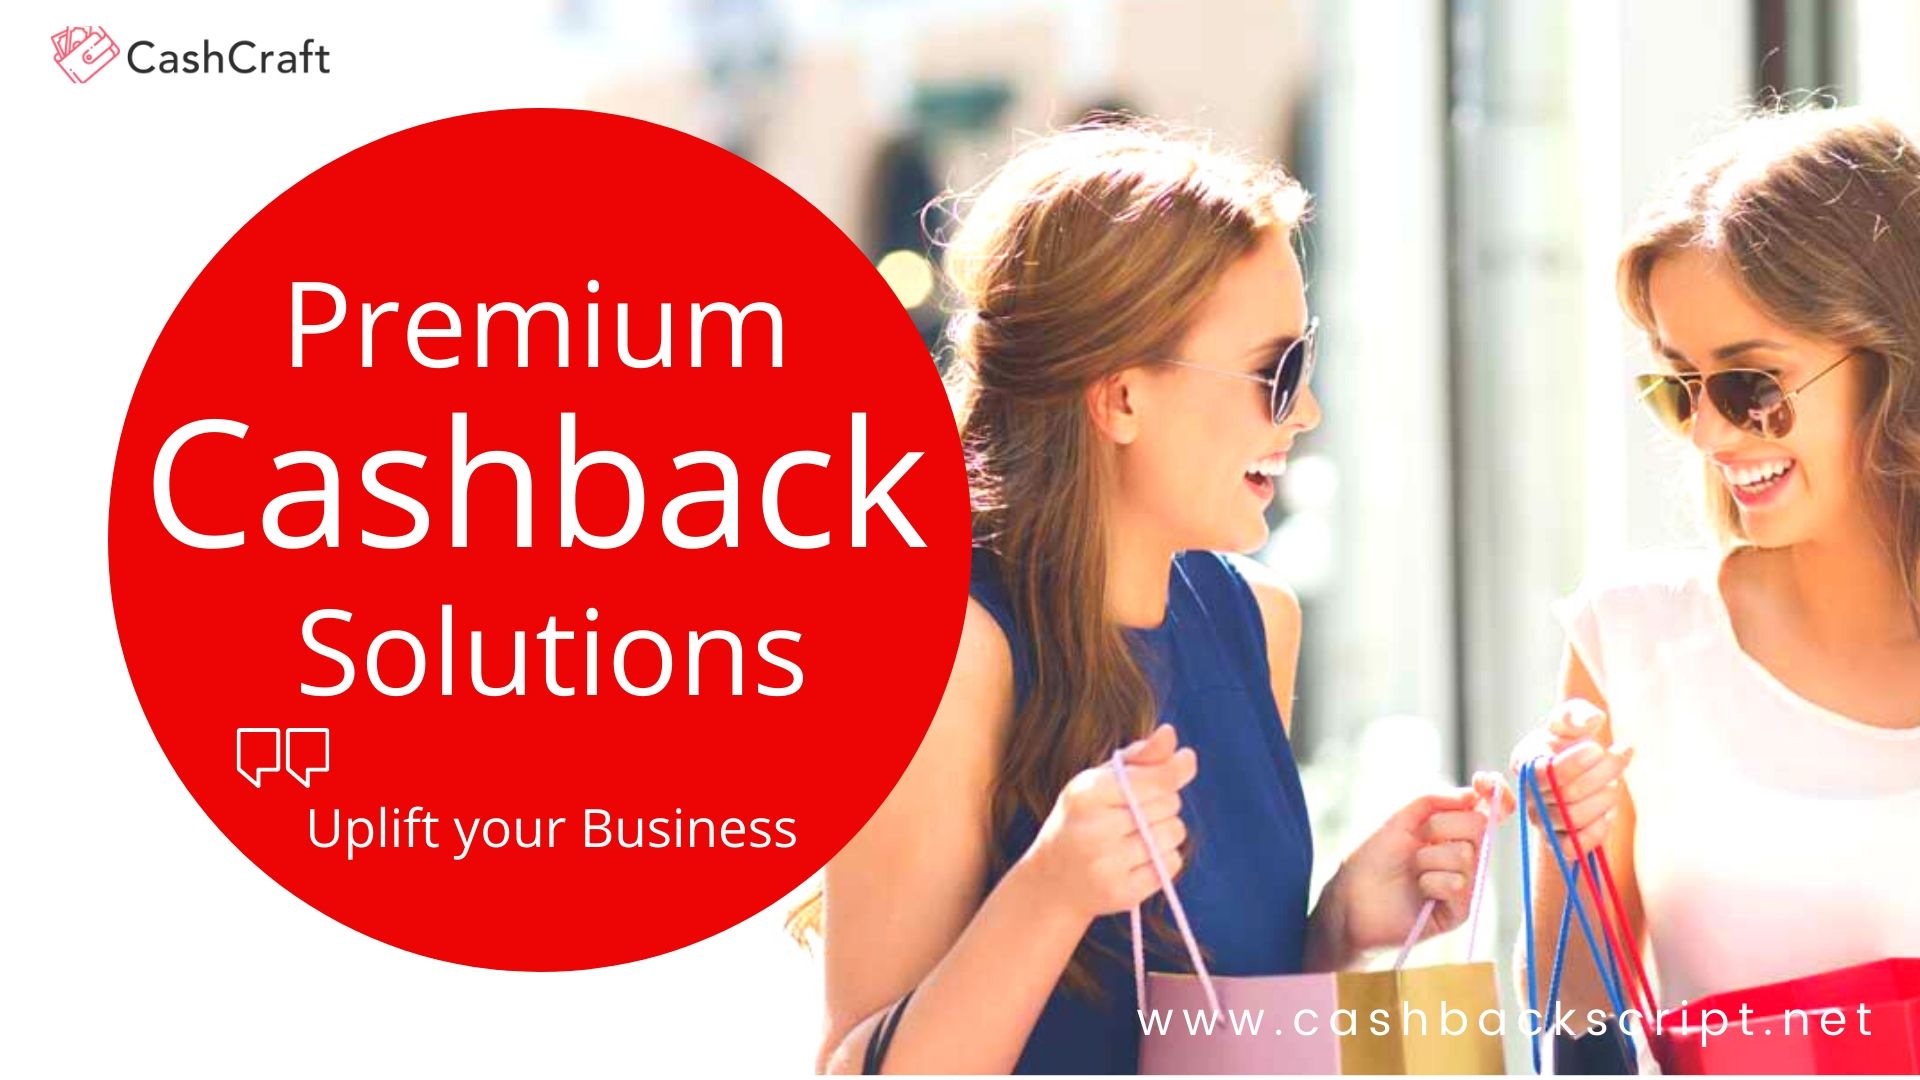 What are the Premium Cashback Solutions that uplift your business?